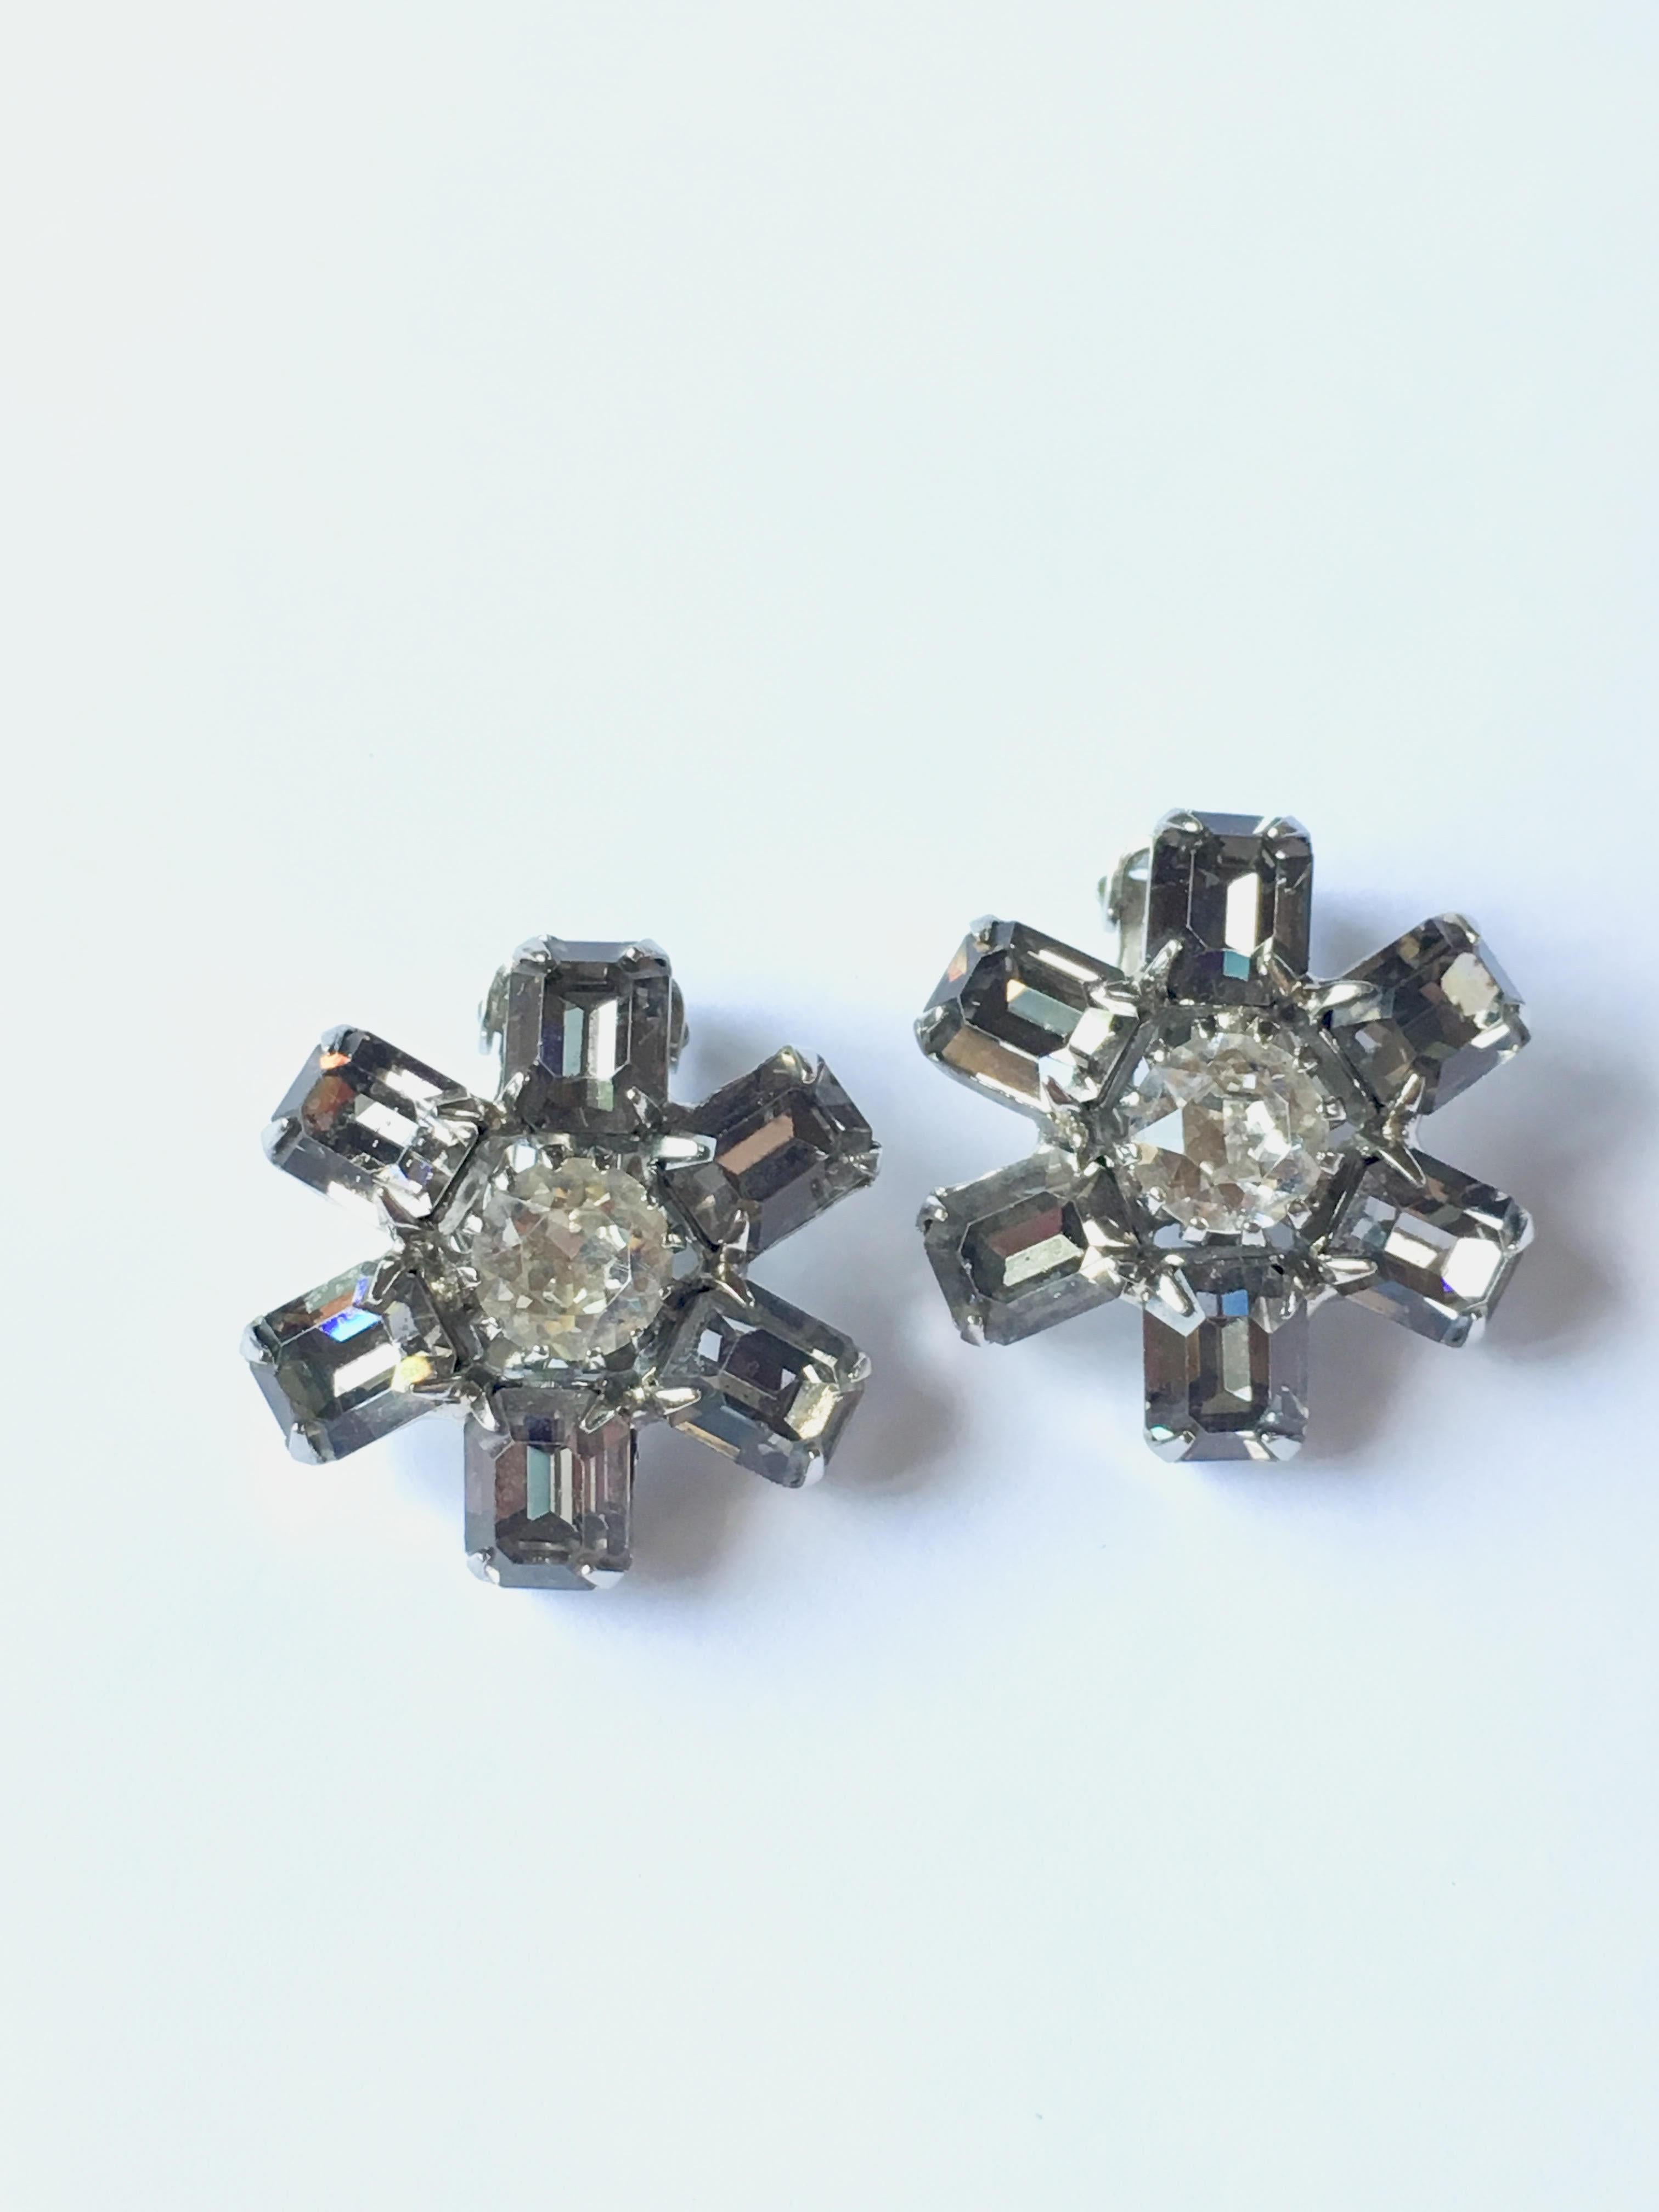 This is a beautiful pair of 1960s Weiss flower clip-on earrings. The petals of the flowers are light grey colored crystals and the centers of the flowers are a clear colored crystal. They are in excellent condition and marked 'Weiss' on the back of